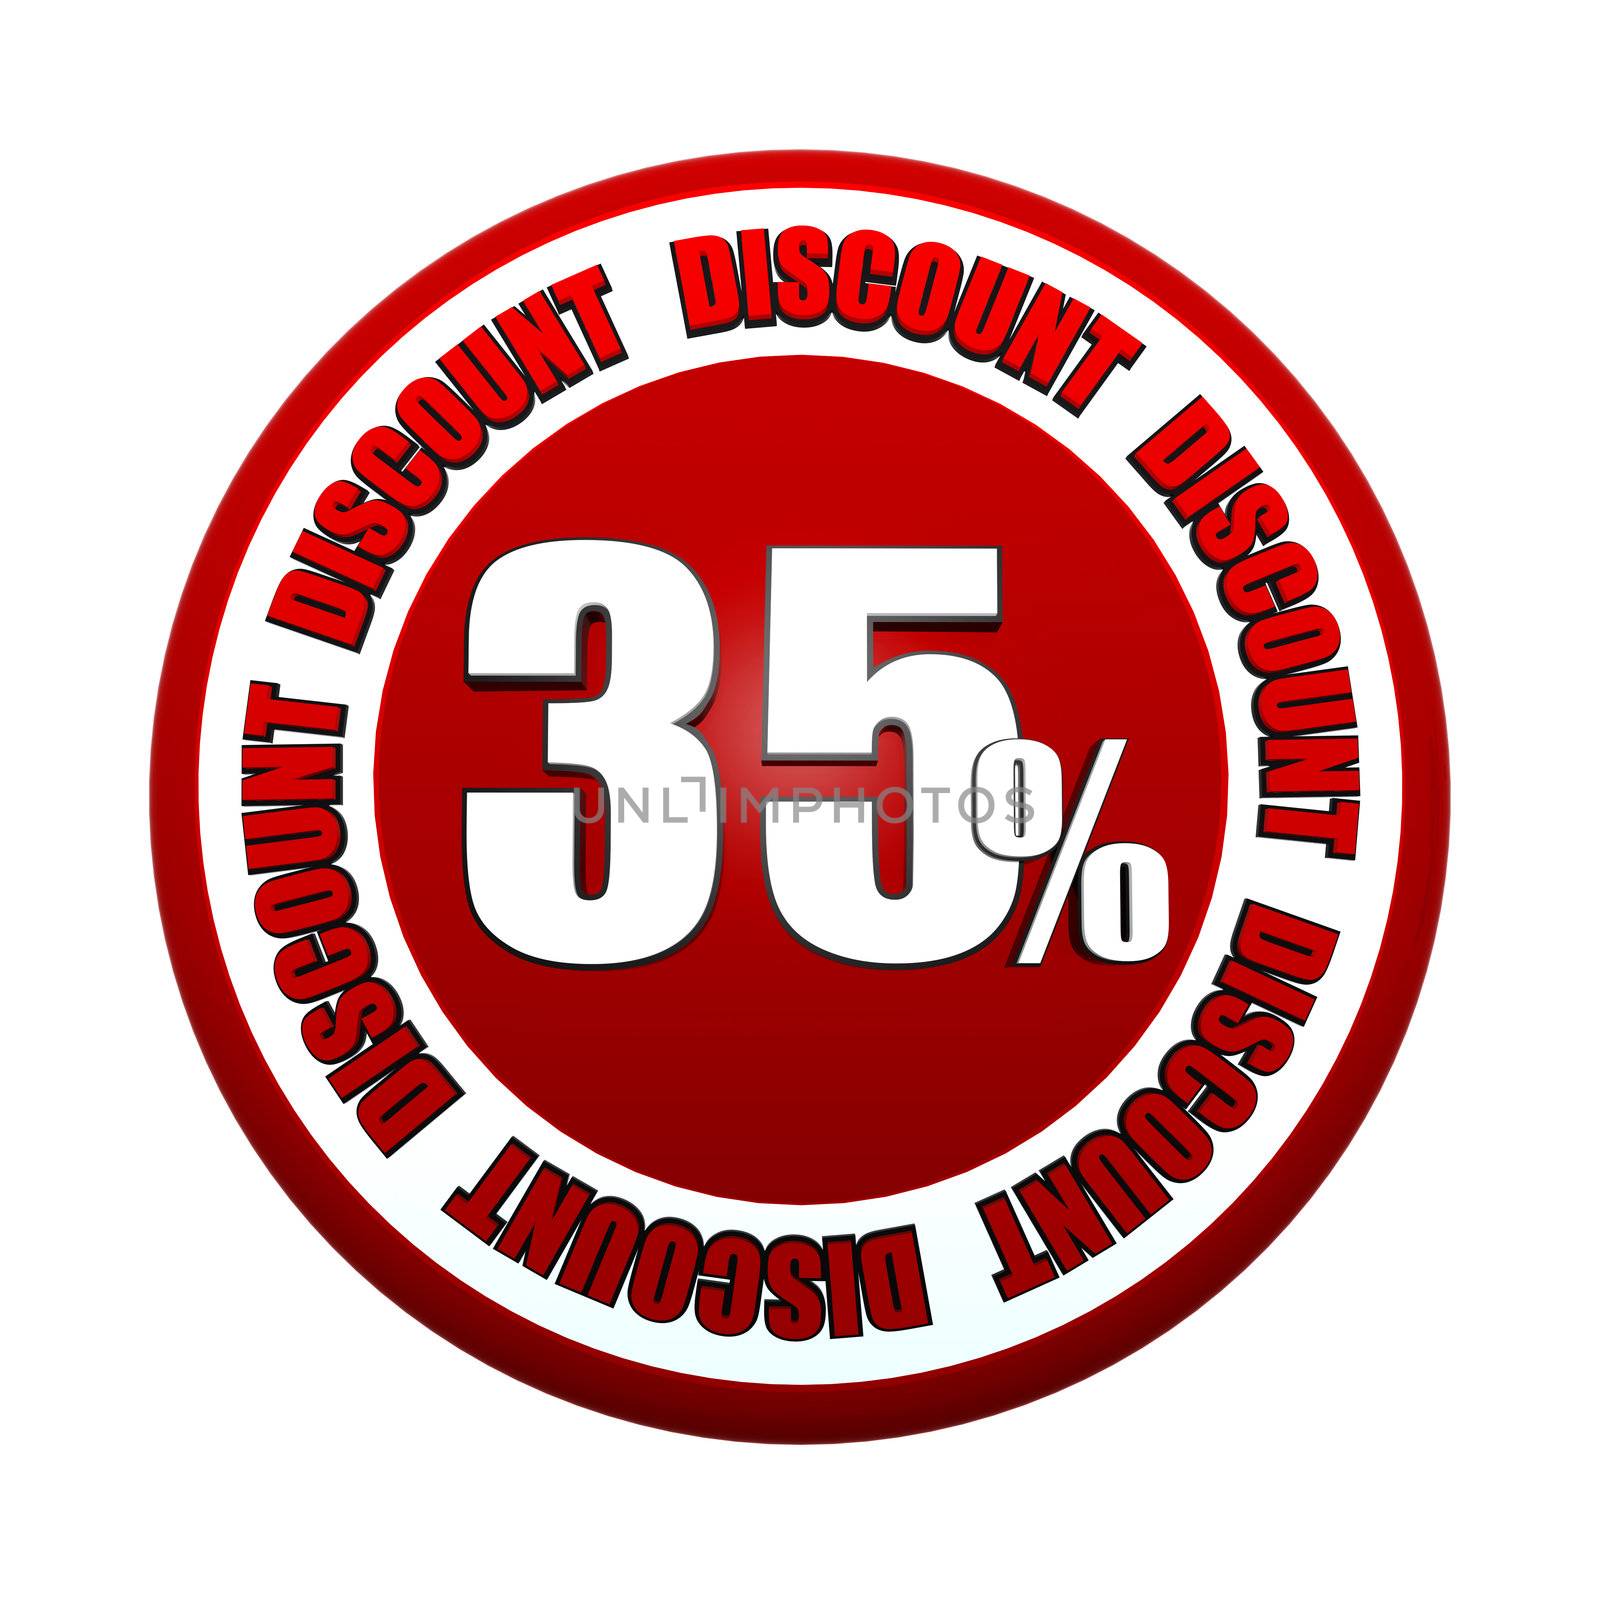 35 percentages discount 3d red circle label by marinini